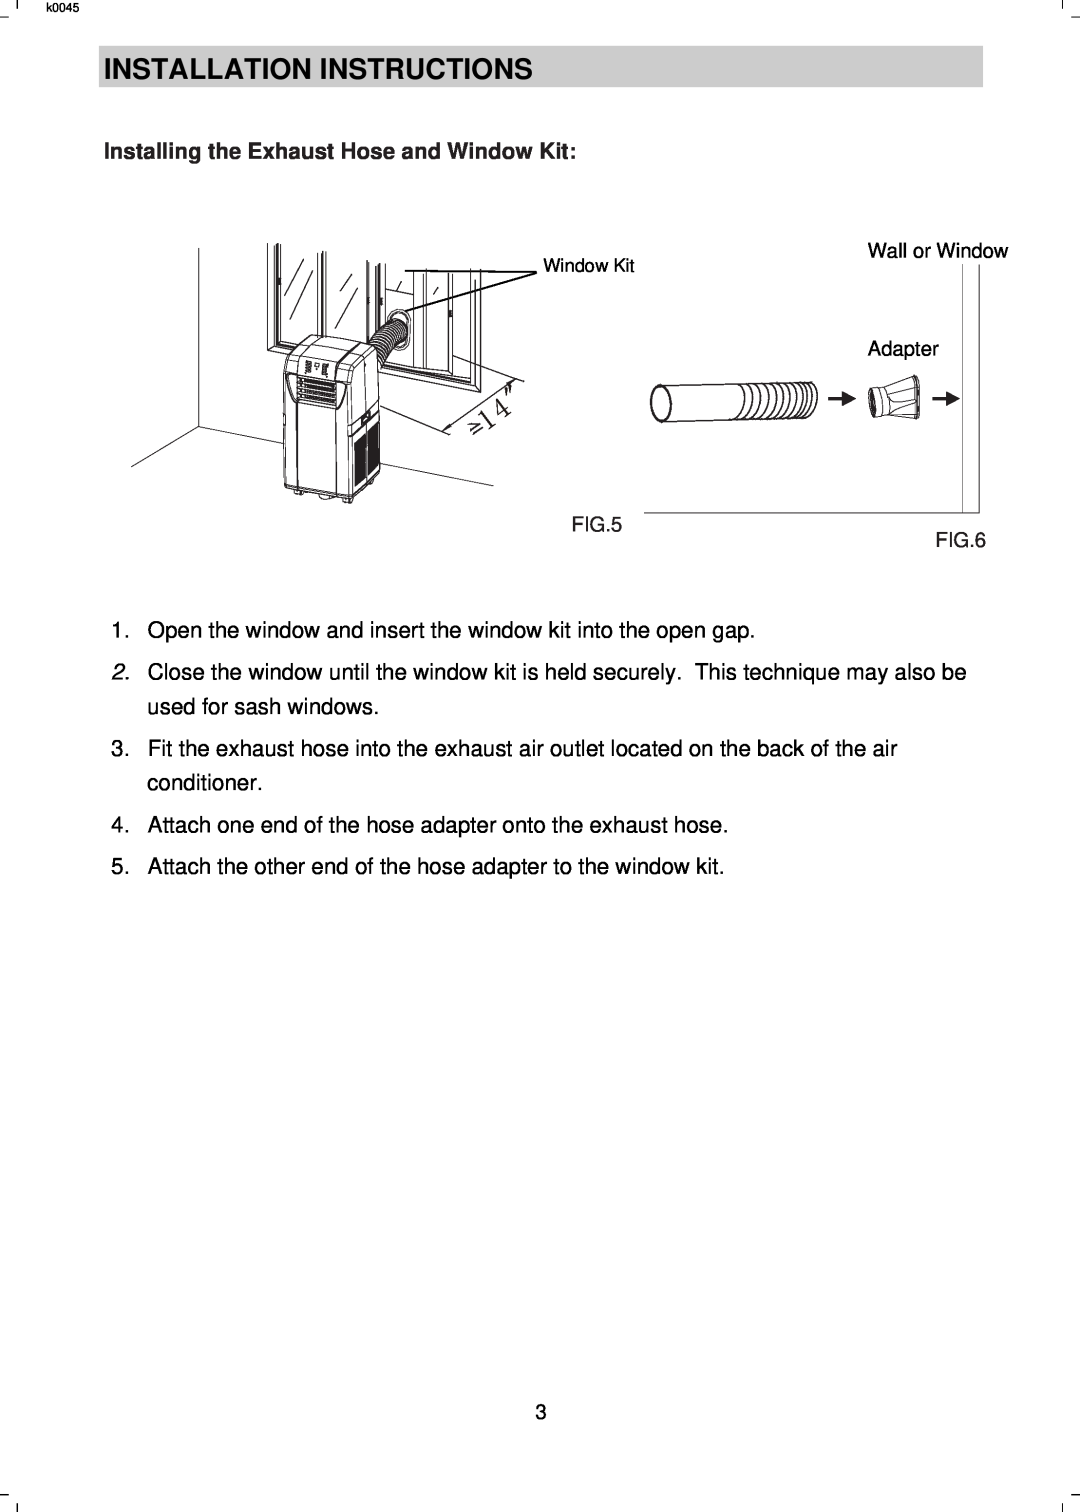 NewAir AC 12000E manual Installation Instructions, Installing the Exhaust Hose and Window Kit 